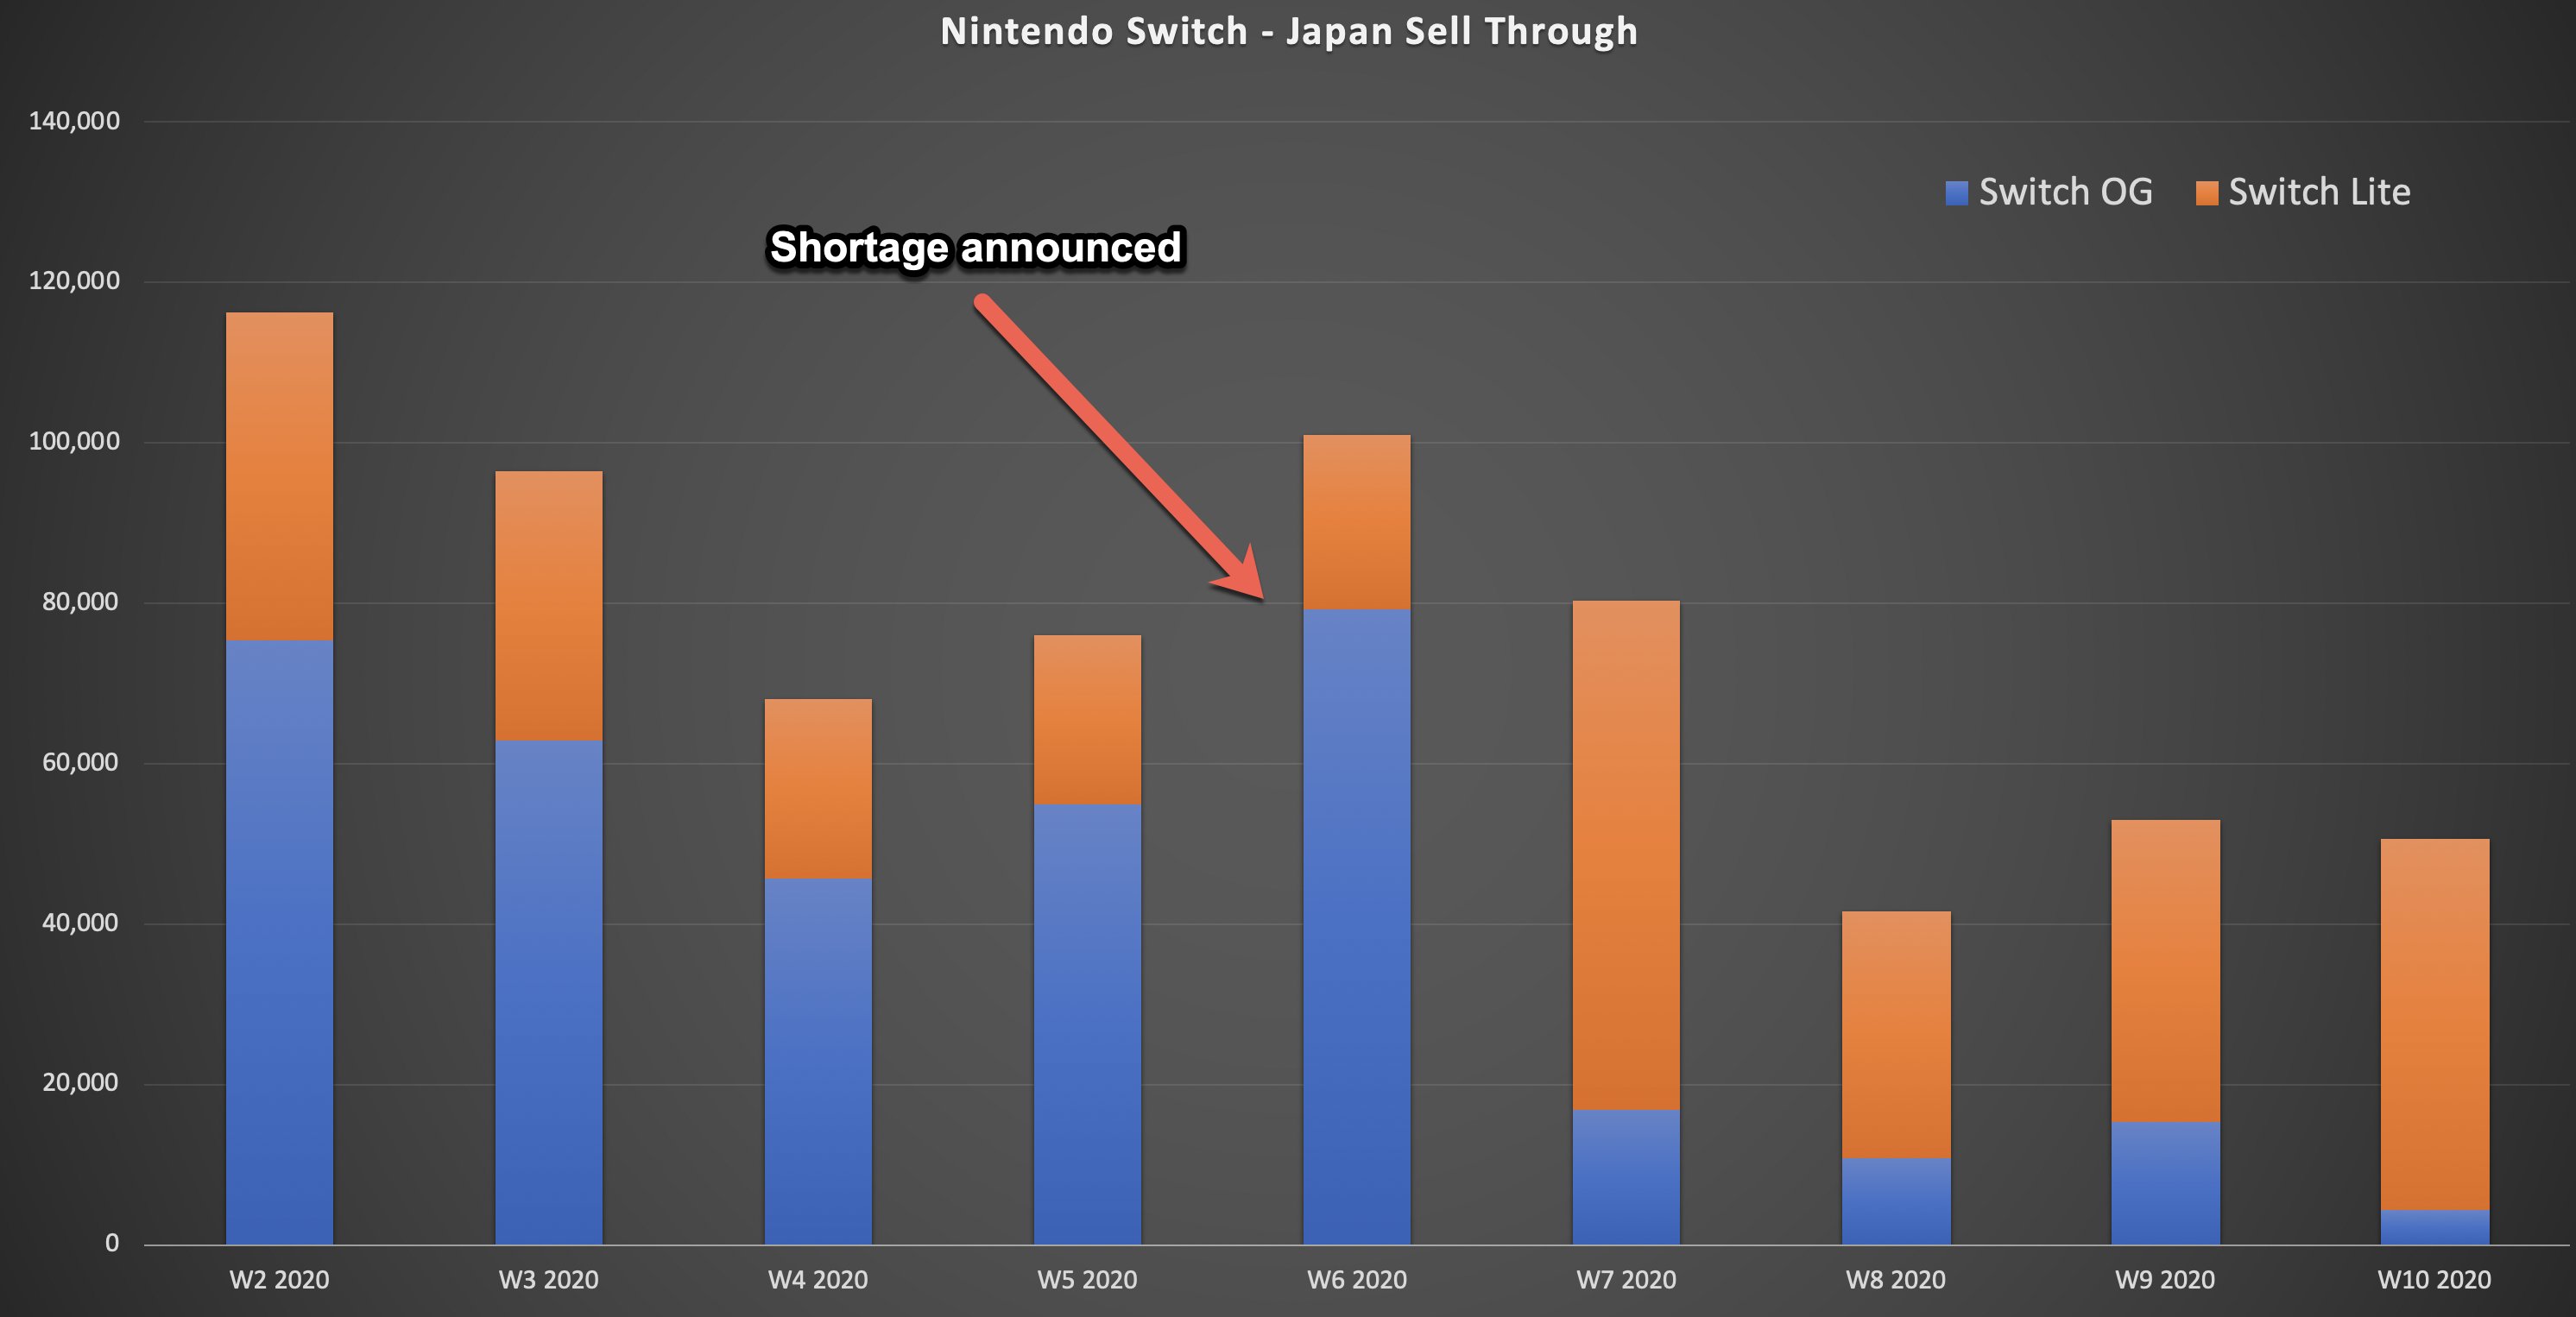 Daniel Ahmad on Twitter: "Impact of COVID-19 on Nintendo Switch sales Japan. - Nintendo announced production and shipment delays for Japan on Feb 6th. - Spike in Original Switch sales quickly